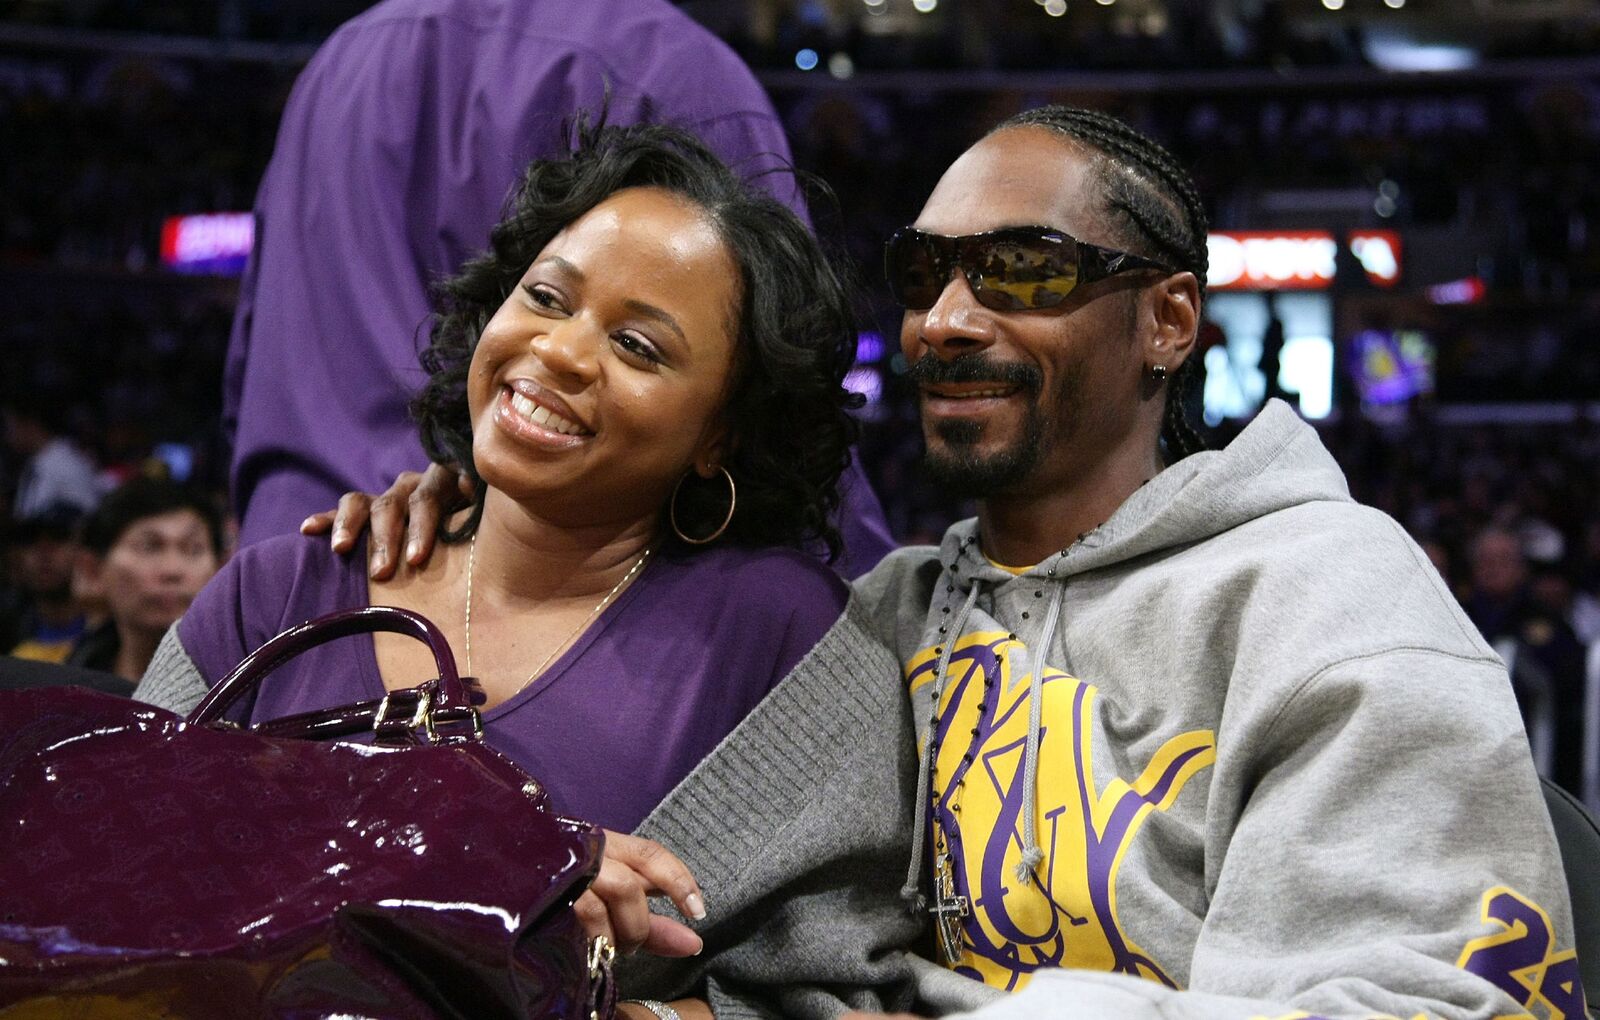 Rapper Snoop Dogg (R) and his wife Shante Broadus (L) attend the Los Angeles Lakers vs Boston Celtics game at the Staples Center. | Photo: Getty Images